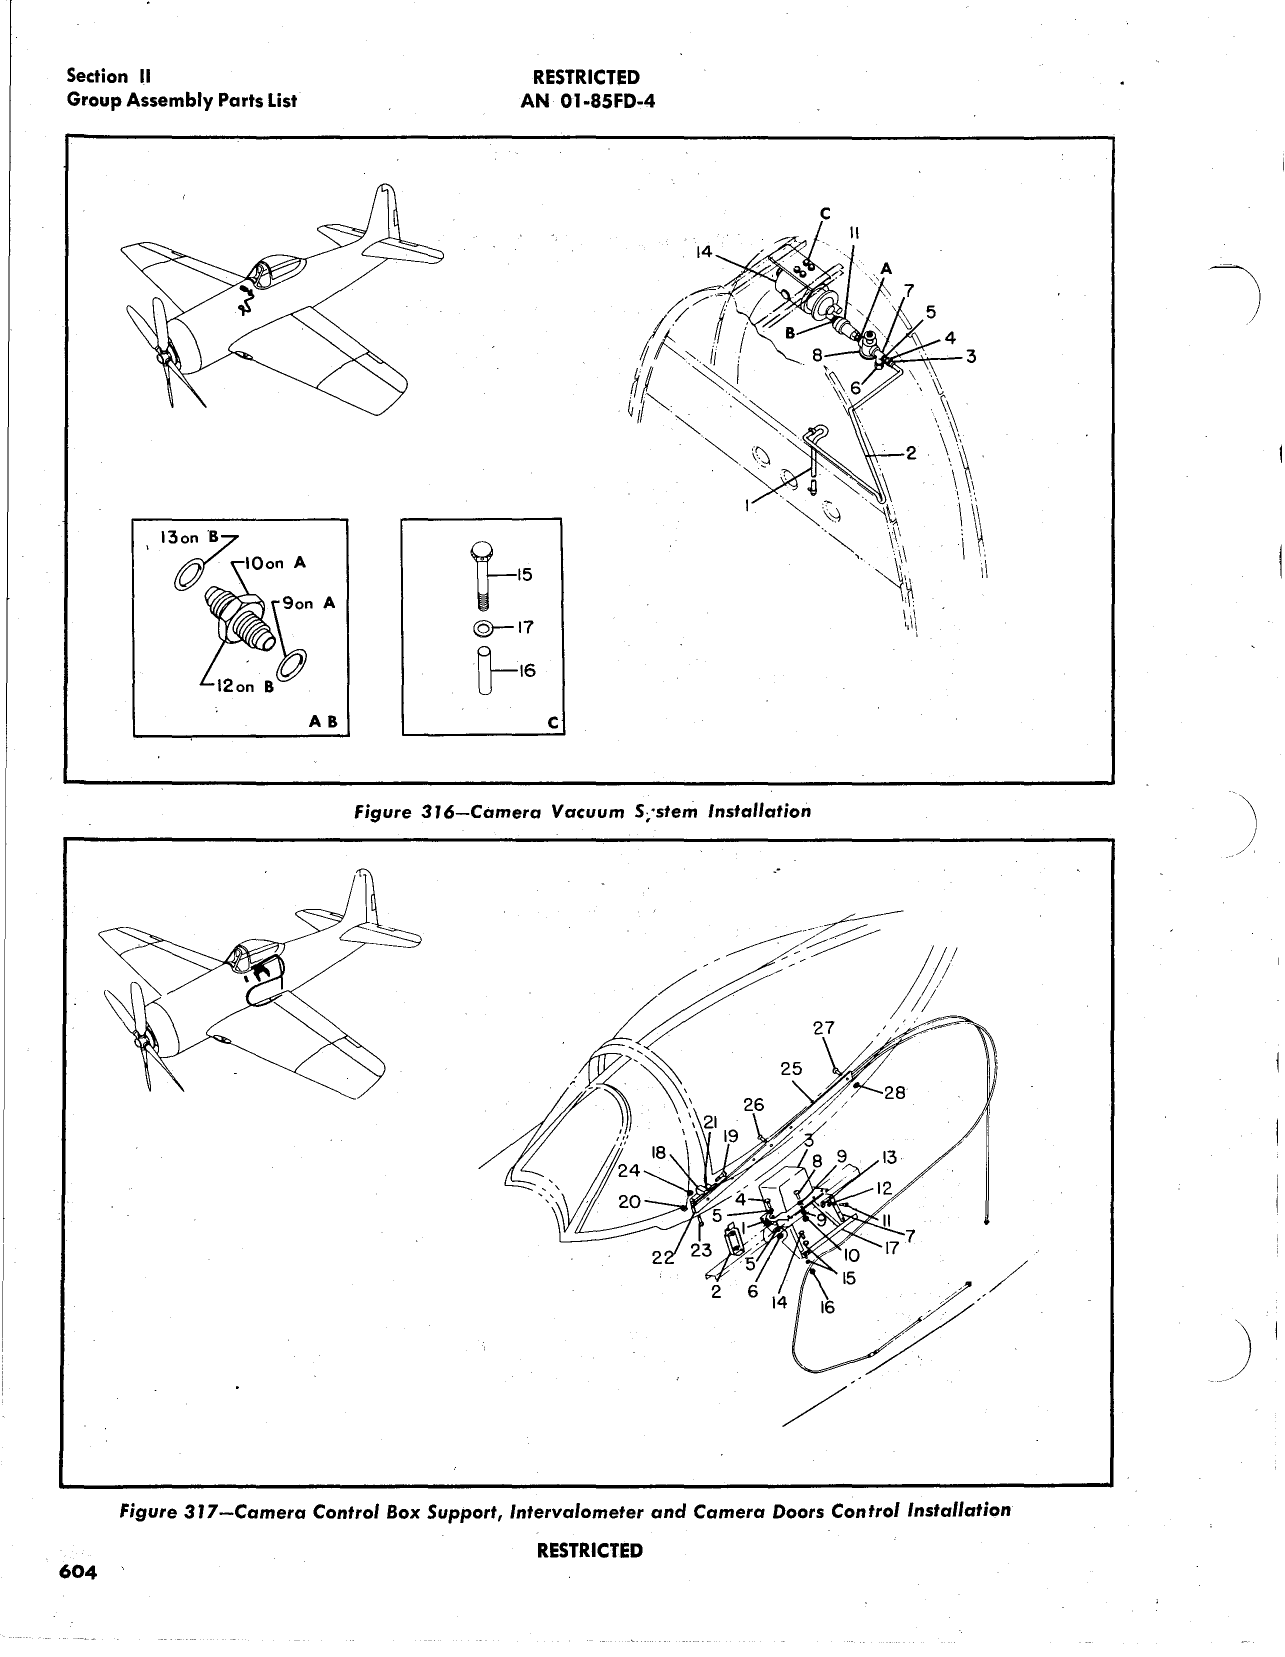 Sample page 619 from AirCorps Library document: Parts Catalog - F8F